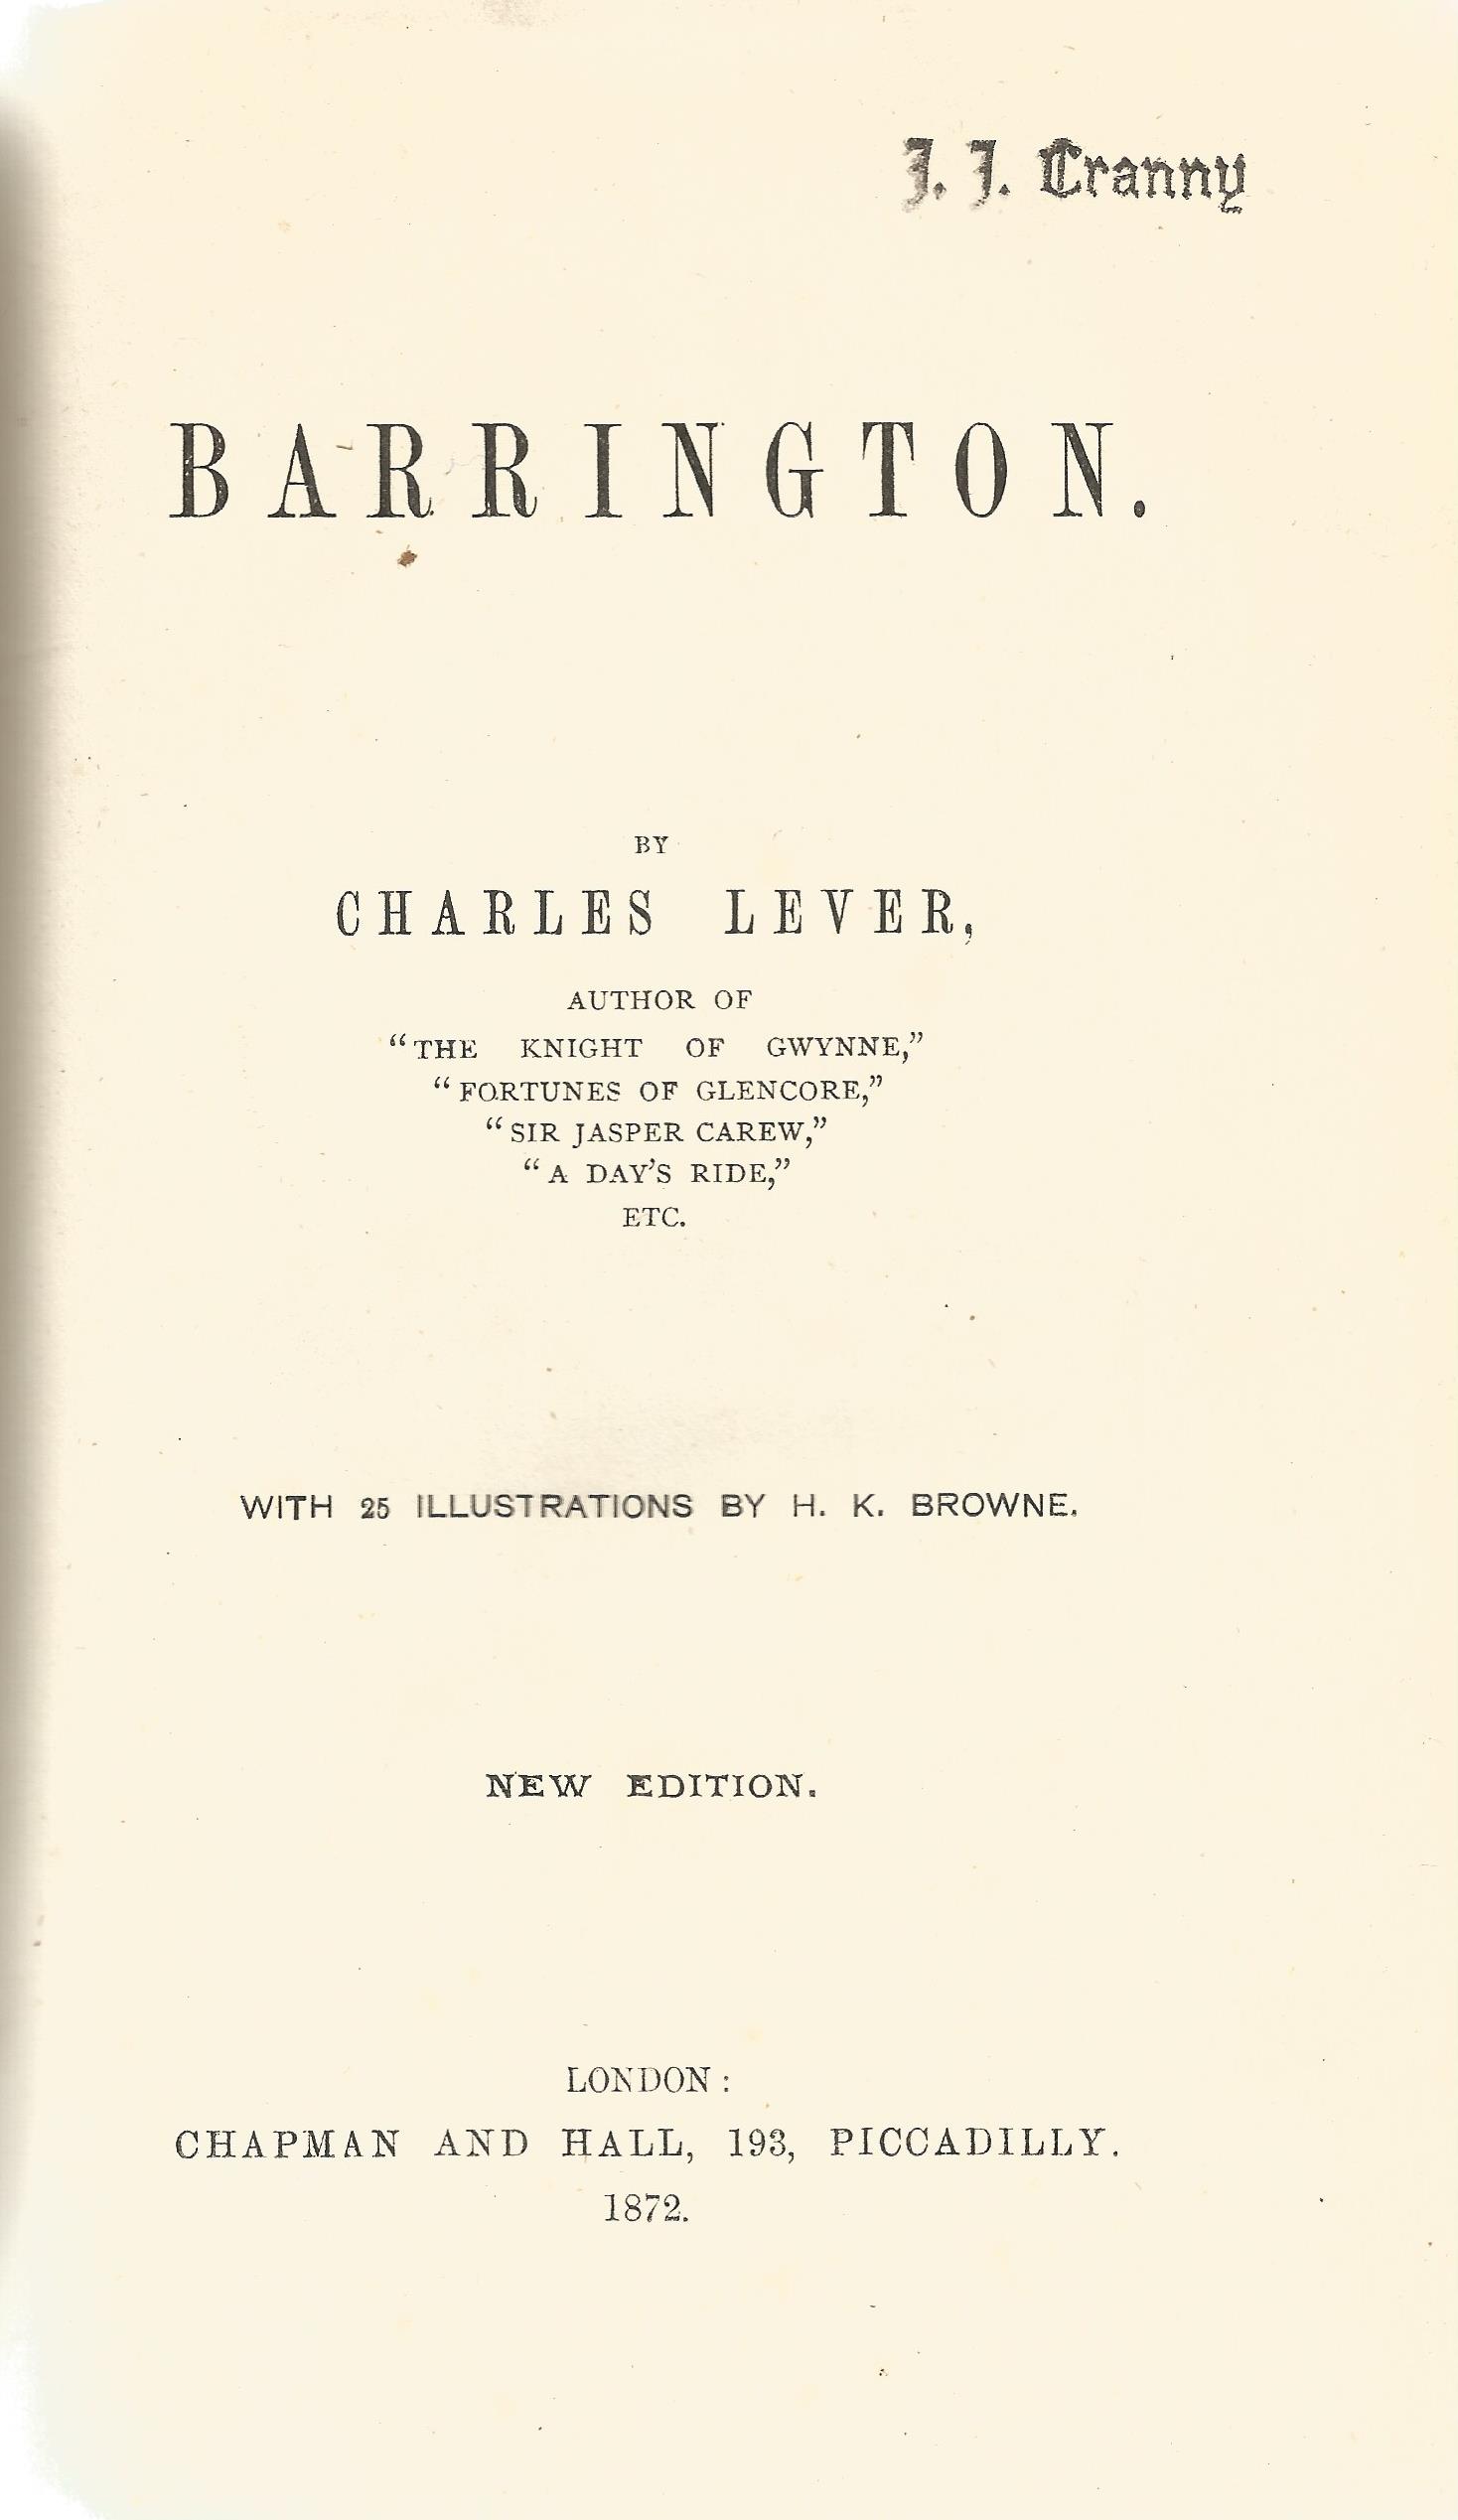 Barrington by Charles Lever Hardback Book 1872 New Edition published by Chapman and Hall some ageing - Image 3 of 3